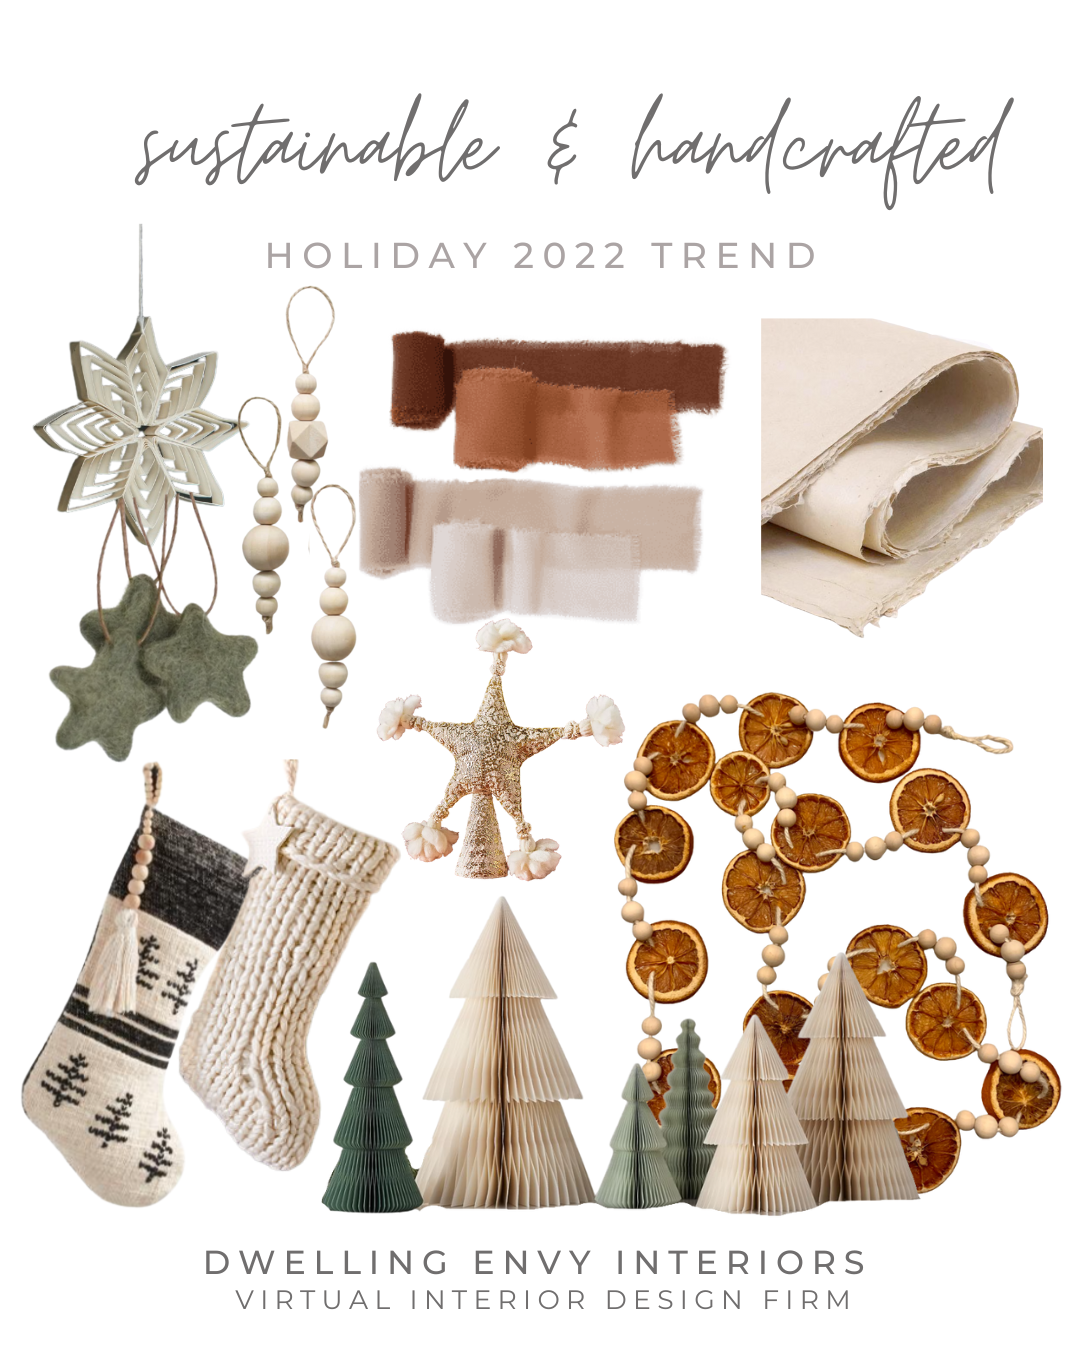 image of Dwelling Envy Interior's recommended items for a Sustainable and Homemade , Handcrafted Theme for the Holidays